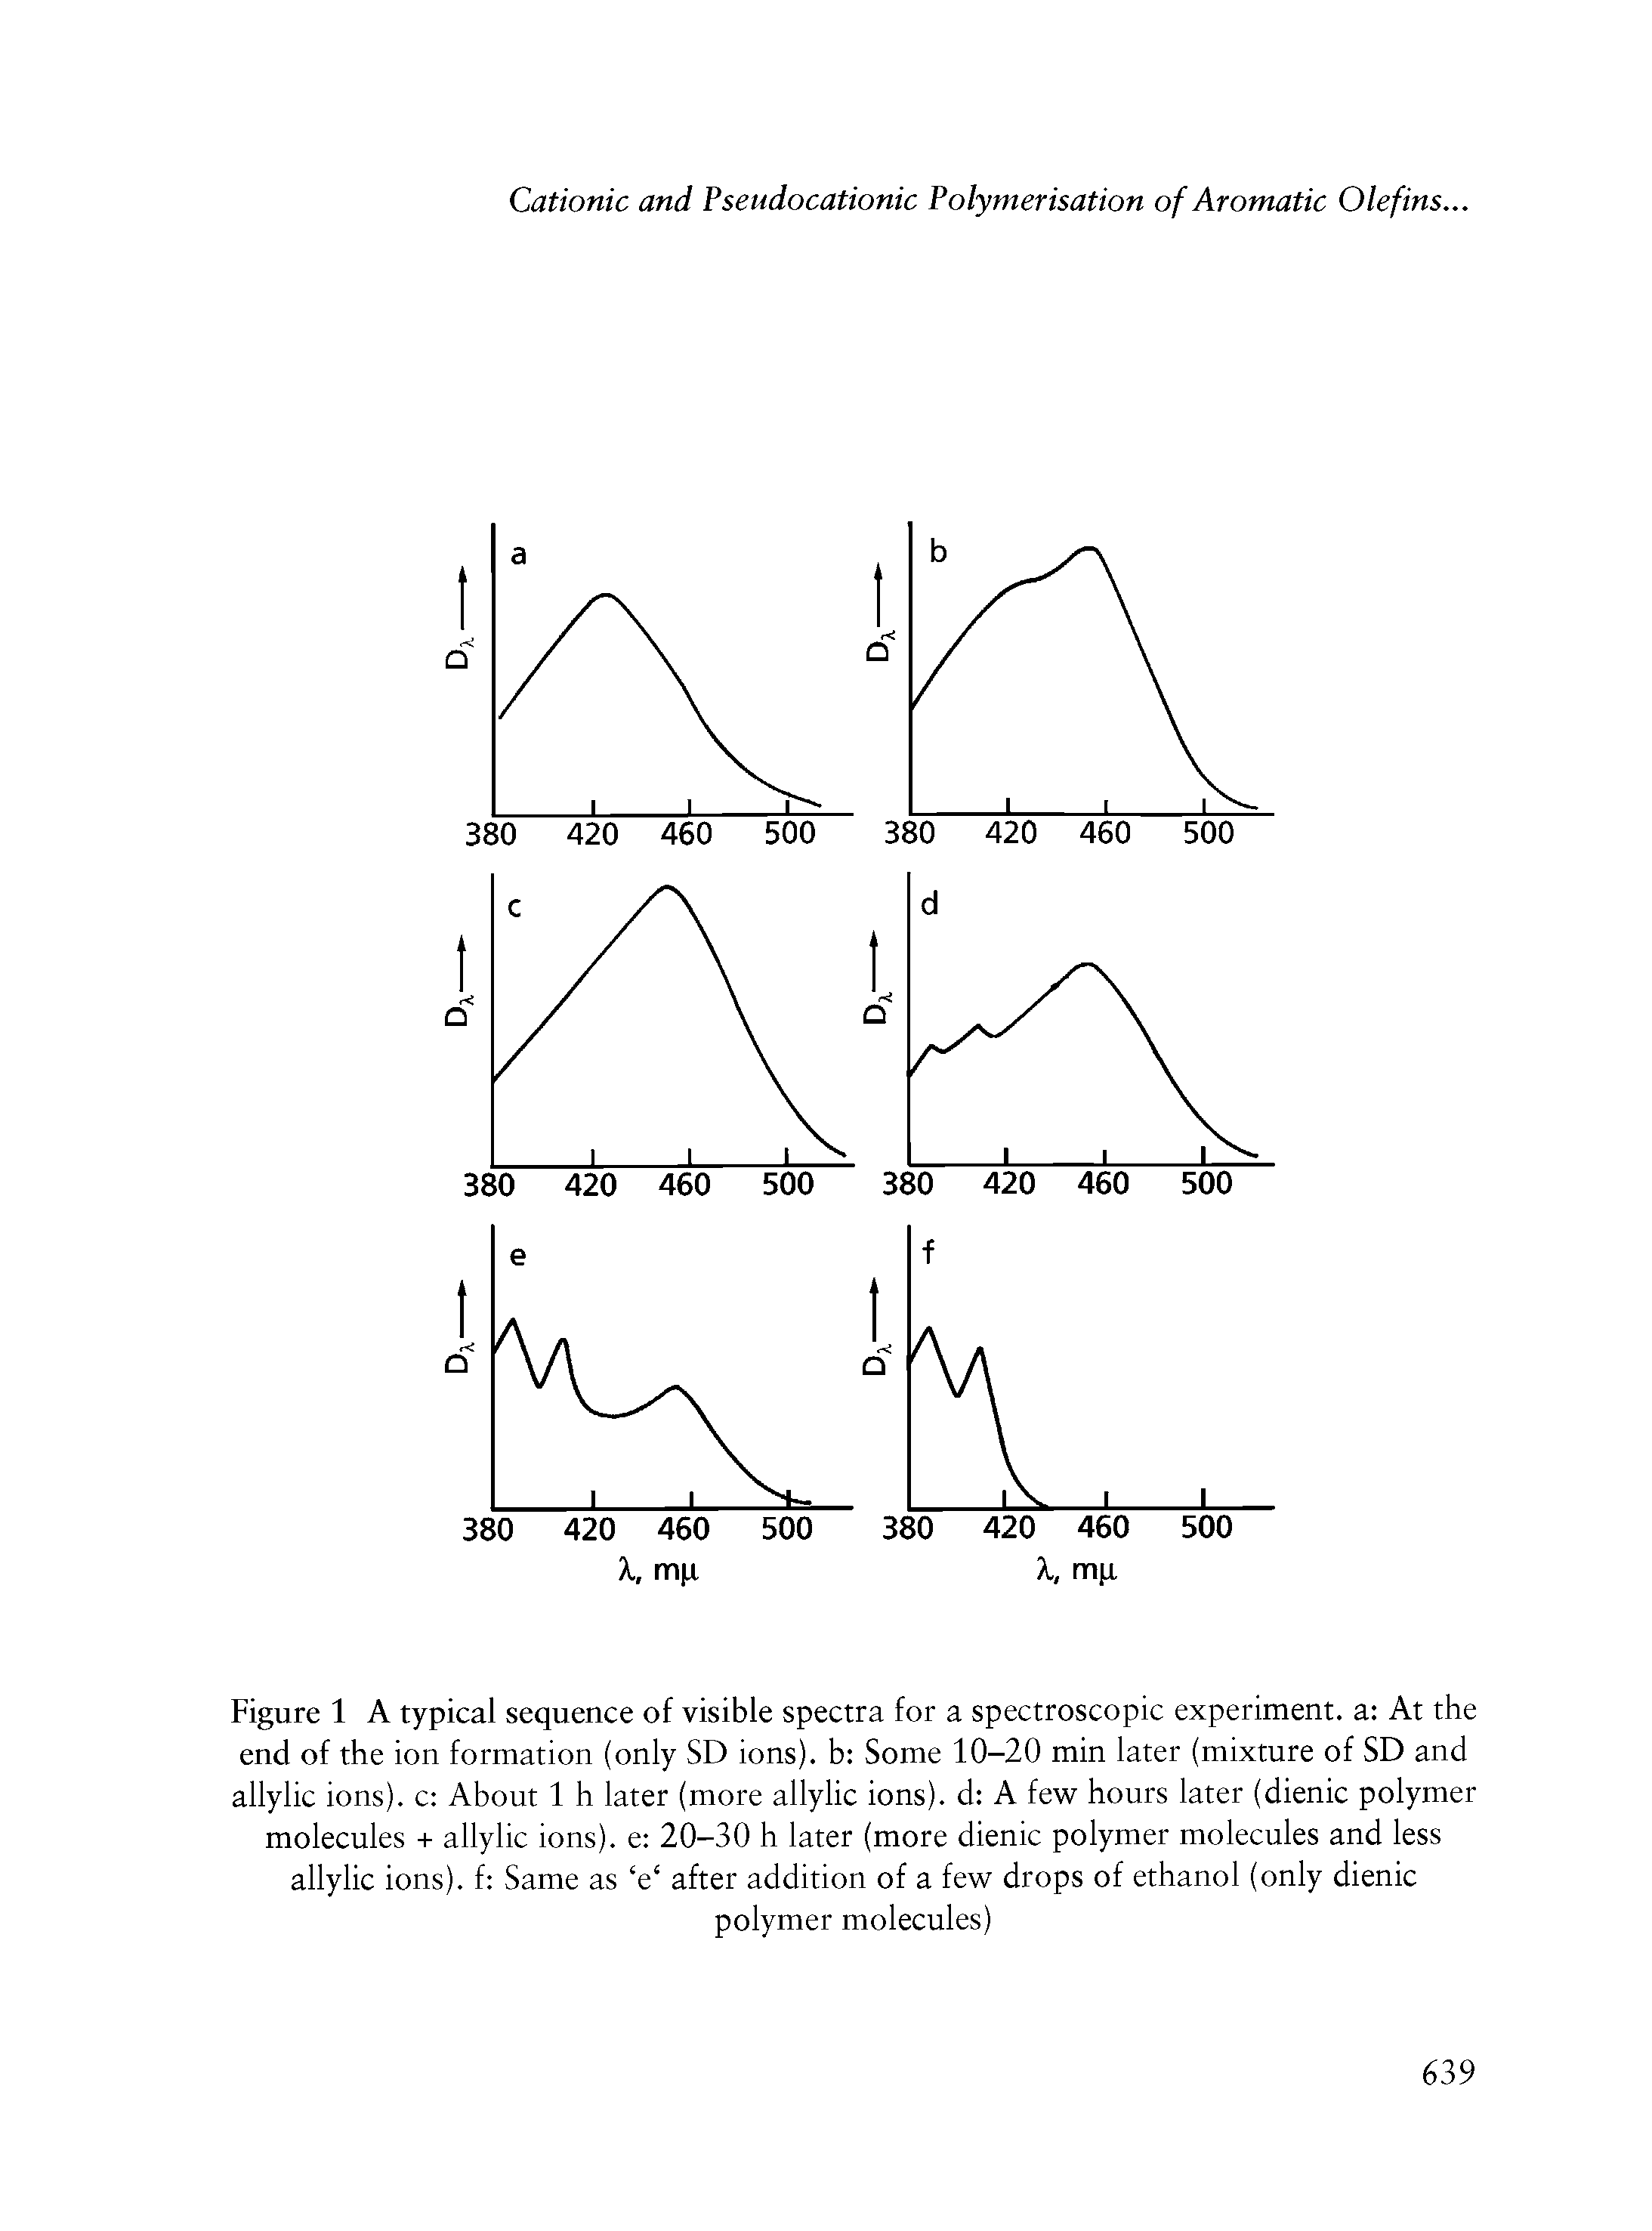 Figure 1 A typical sequence of visible spectra for a spectroscopic experiment, a At the end of the ion formation (only SD ions), b Some 10-20 min later (mixture of SD and allylic ions), c About 1 h later (more allylic ions), d A few hours later (dienic polymer molecules + allylic ions), e 20-30 h later (more dienic polymer molecules and less allylic ions), f Same as e after addition of a few drops of ethanol (only dienic...